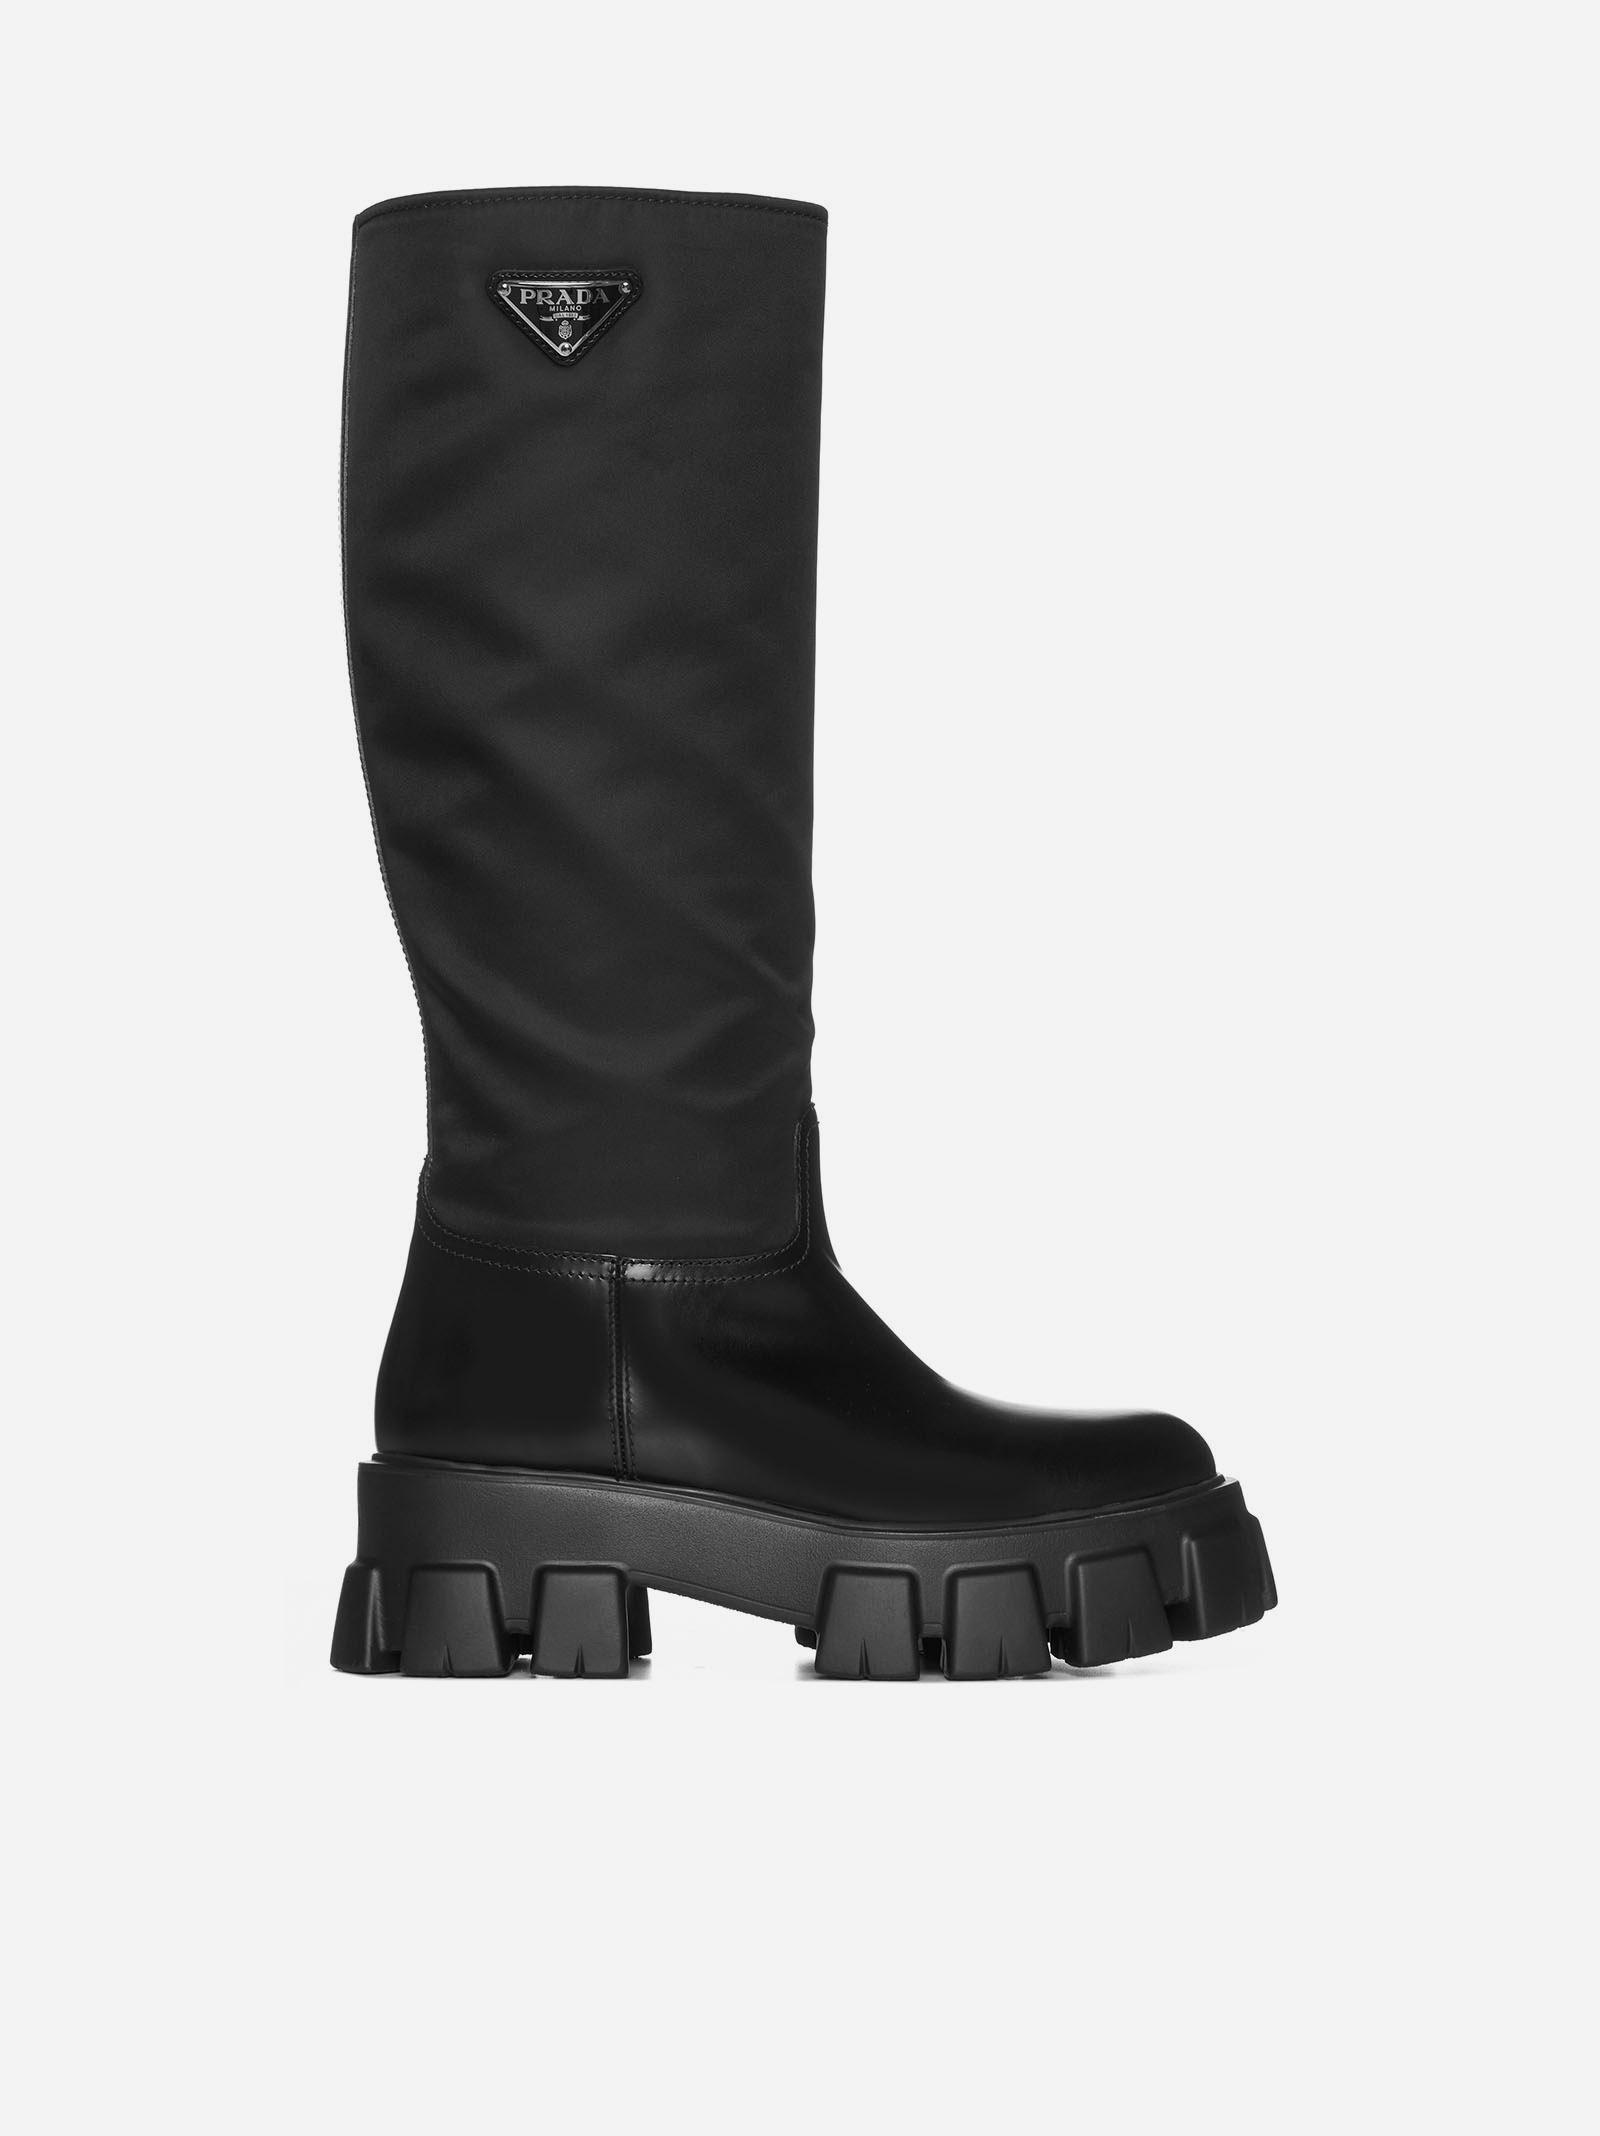 Prada Monolith Leather And Nylon Boots in Black | Lyst